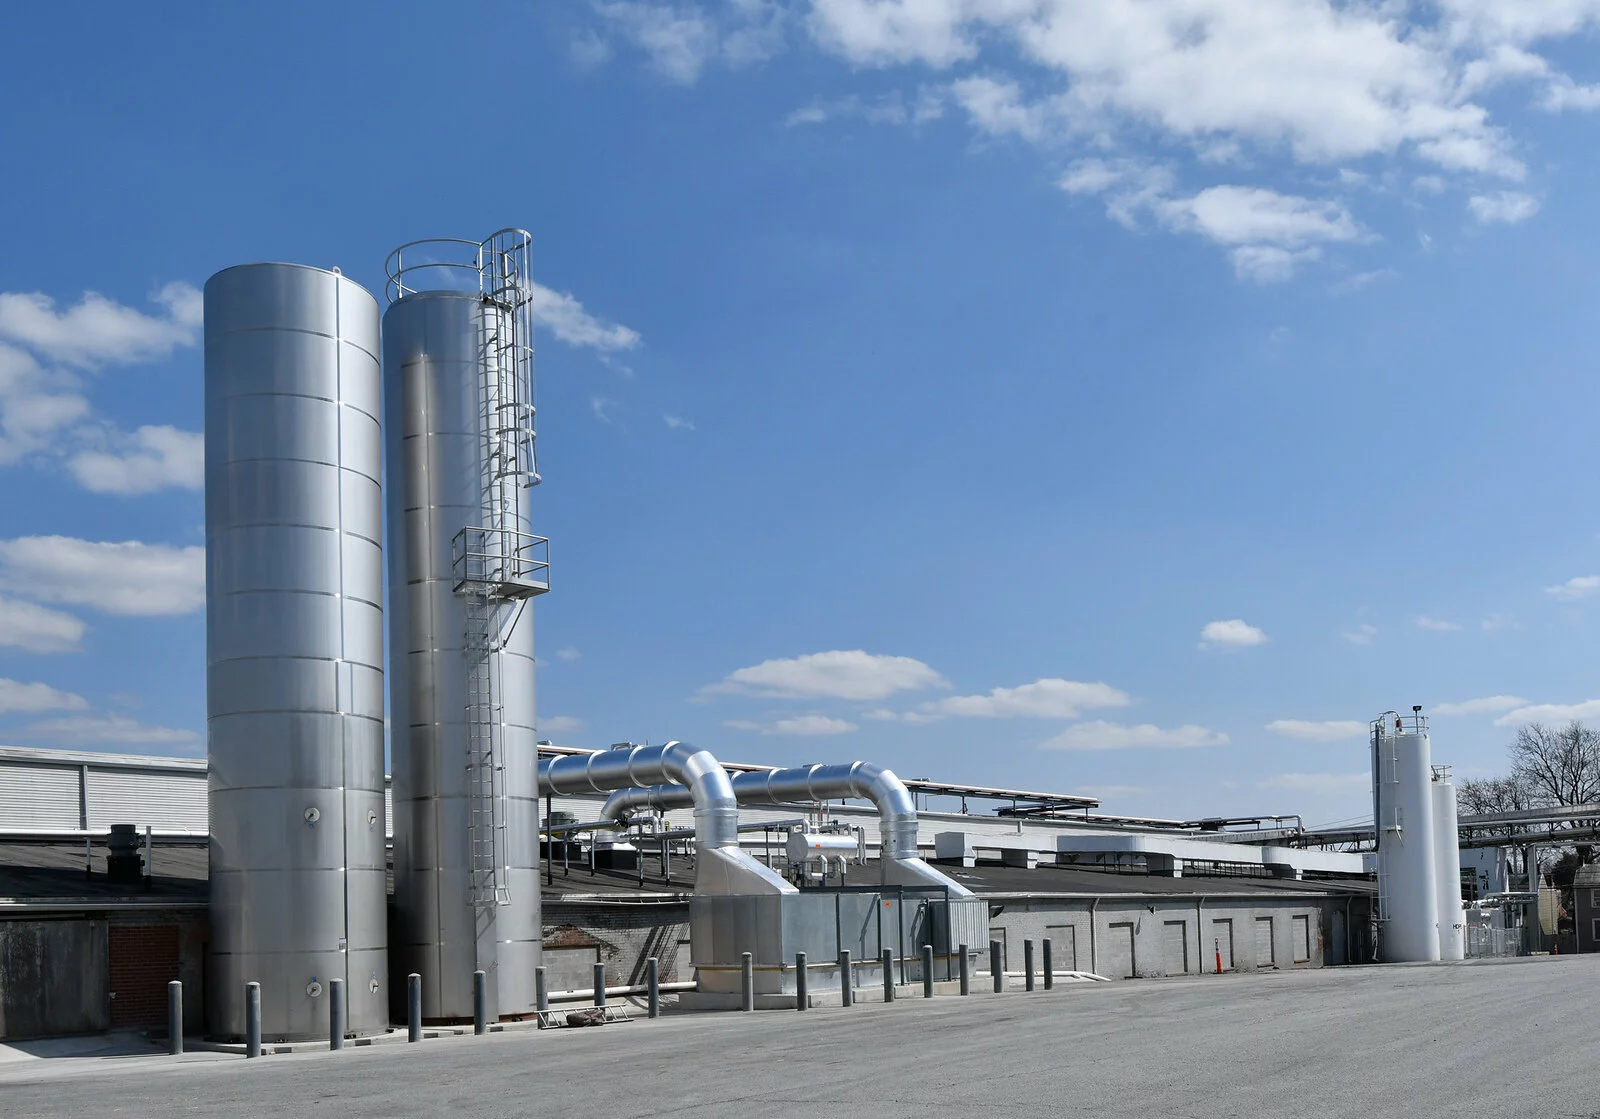 Exterior building multiple silver silos, photo taken on a sunny day with clouds